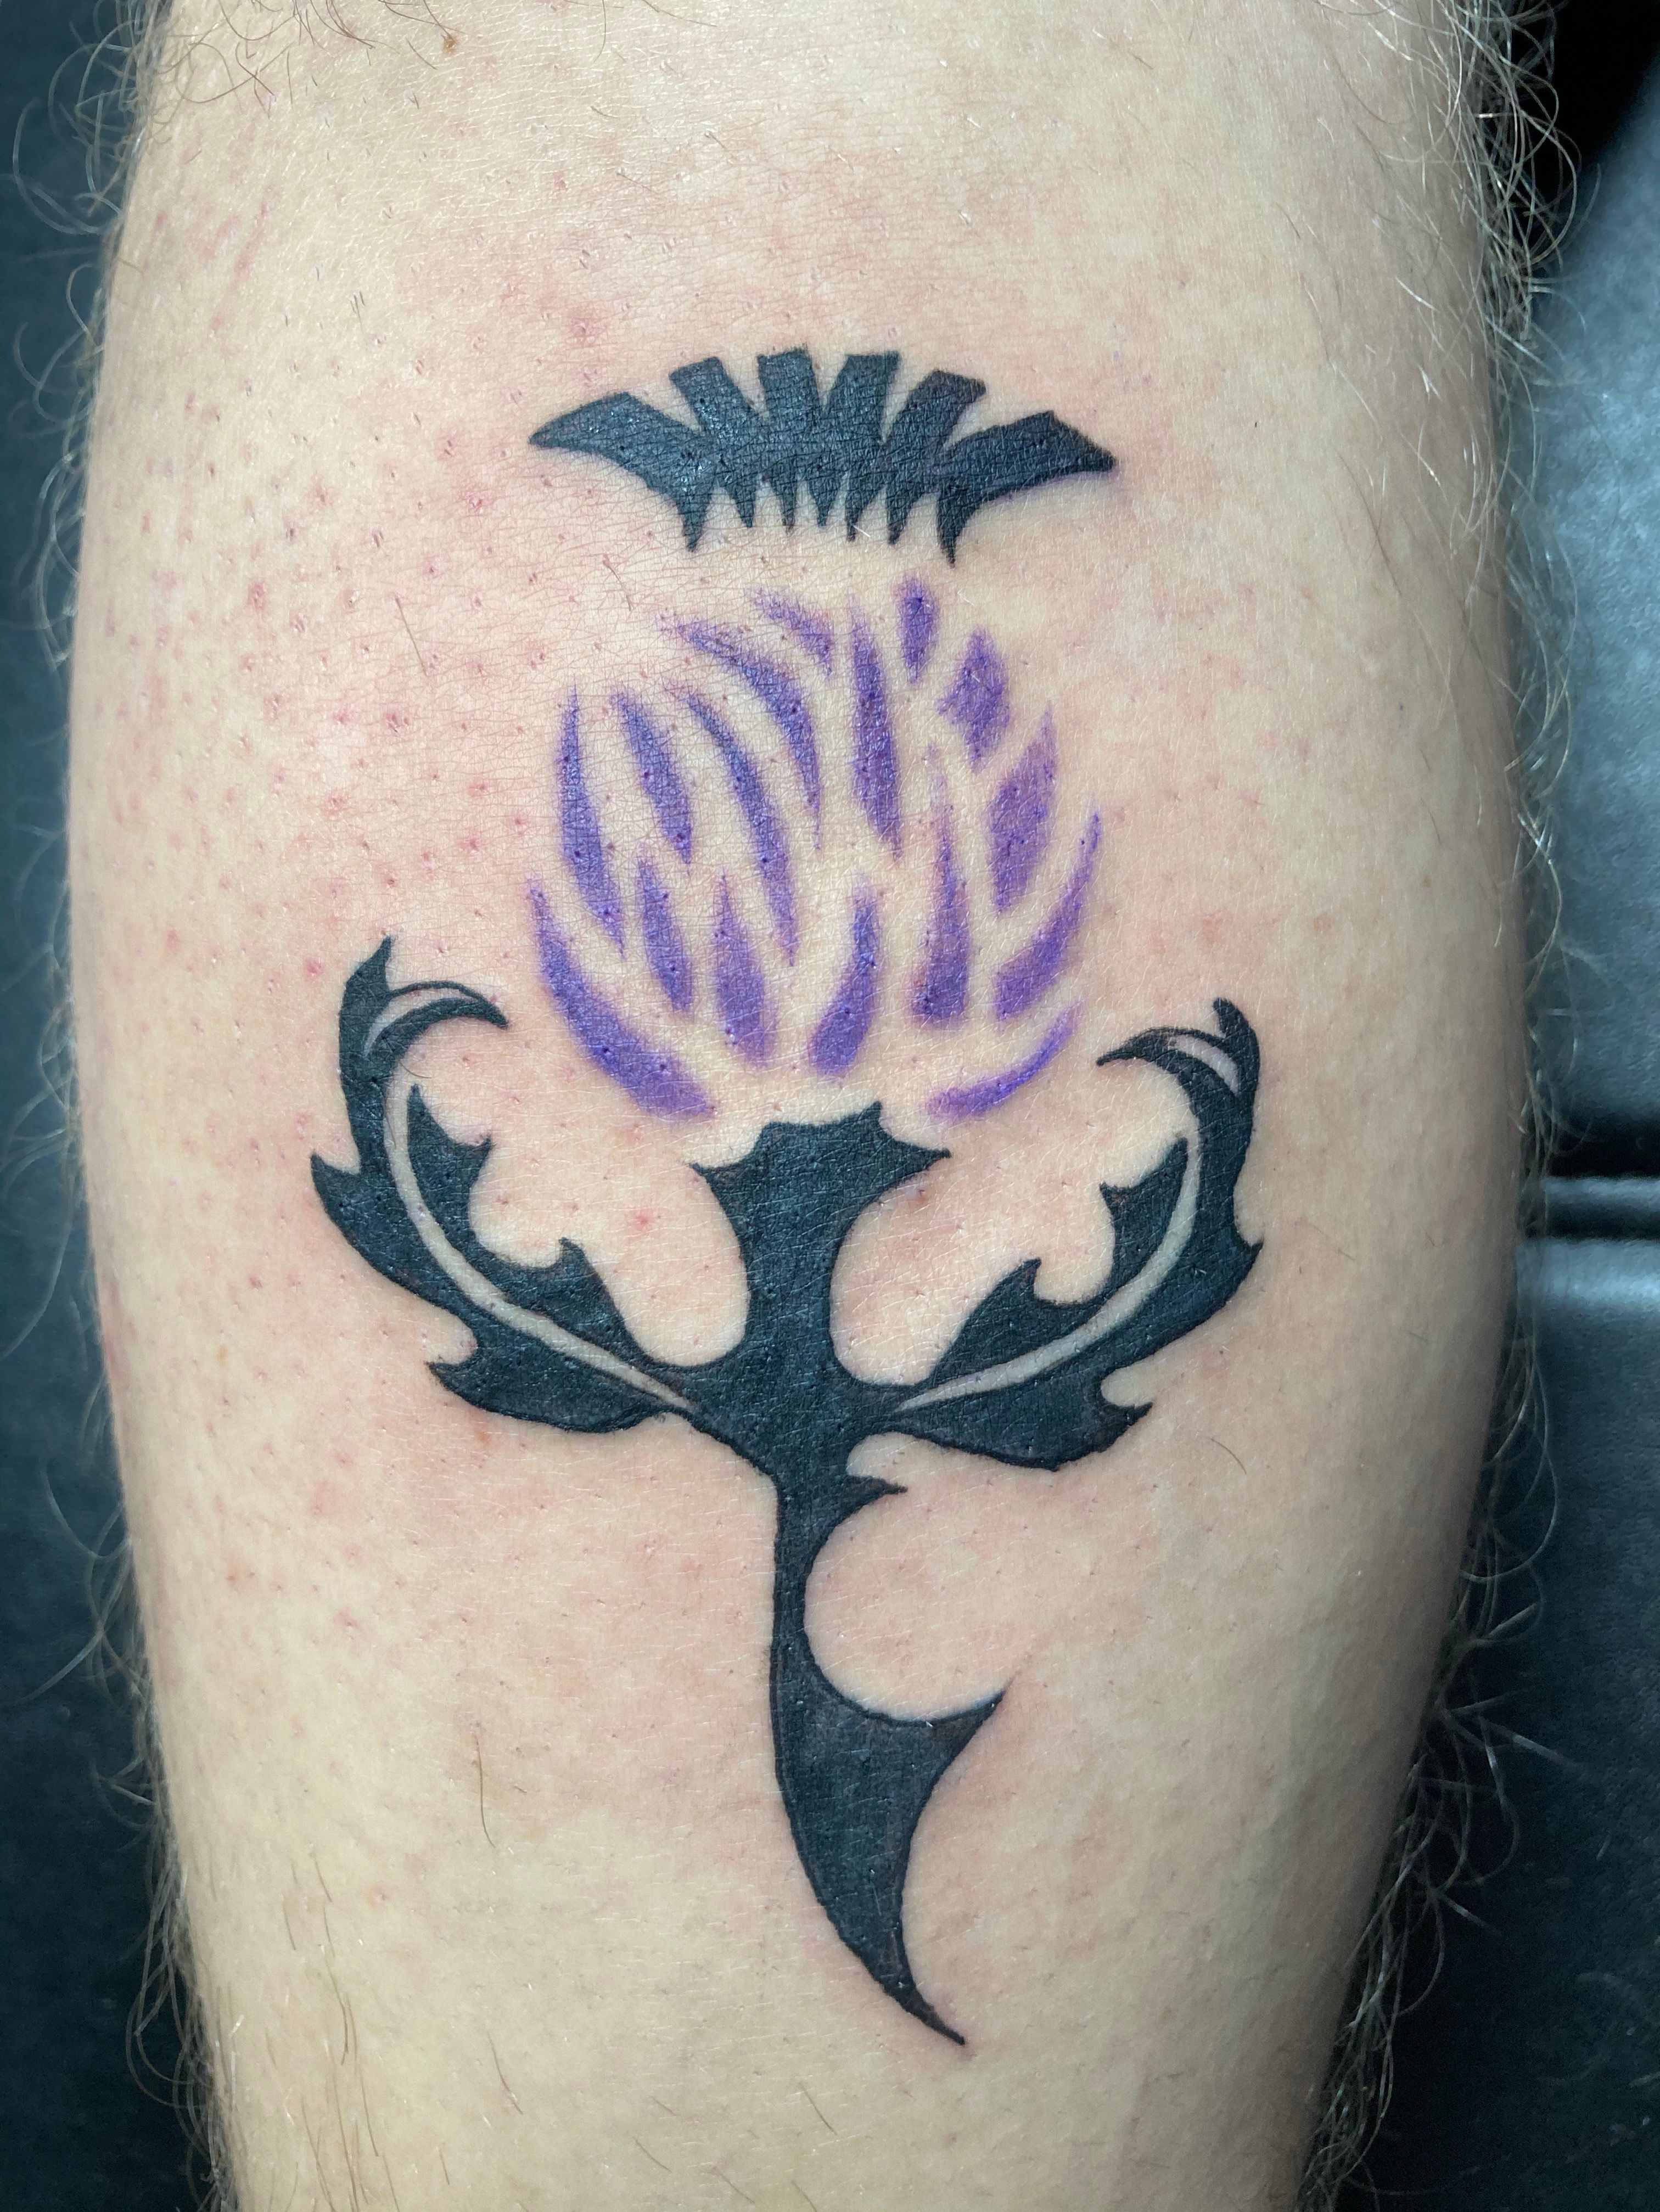 Tattoo tagged with: bell, small, patriotic, tiny, hand poked, ifttt,  little, wrist, doy, scotland, other | inked-app.com